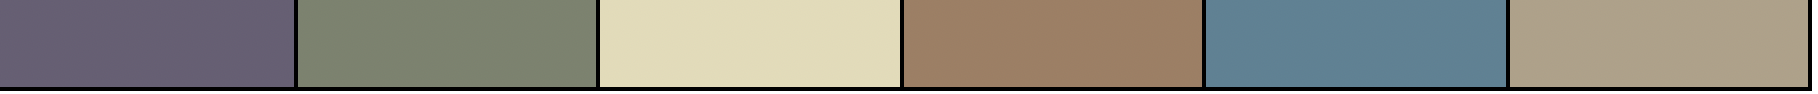  Pamela Colman Smith, Colour Palette for The Green Sheaf, No. 11, 1904.                        Courtesy of Marion Grant and the RGB Eyedropper Tool 